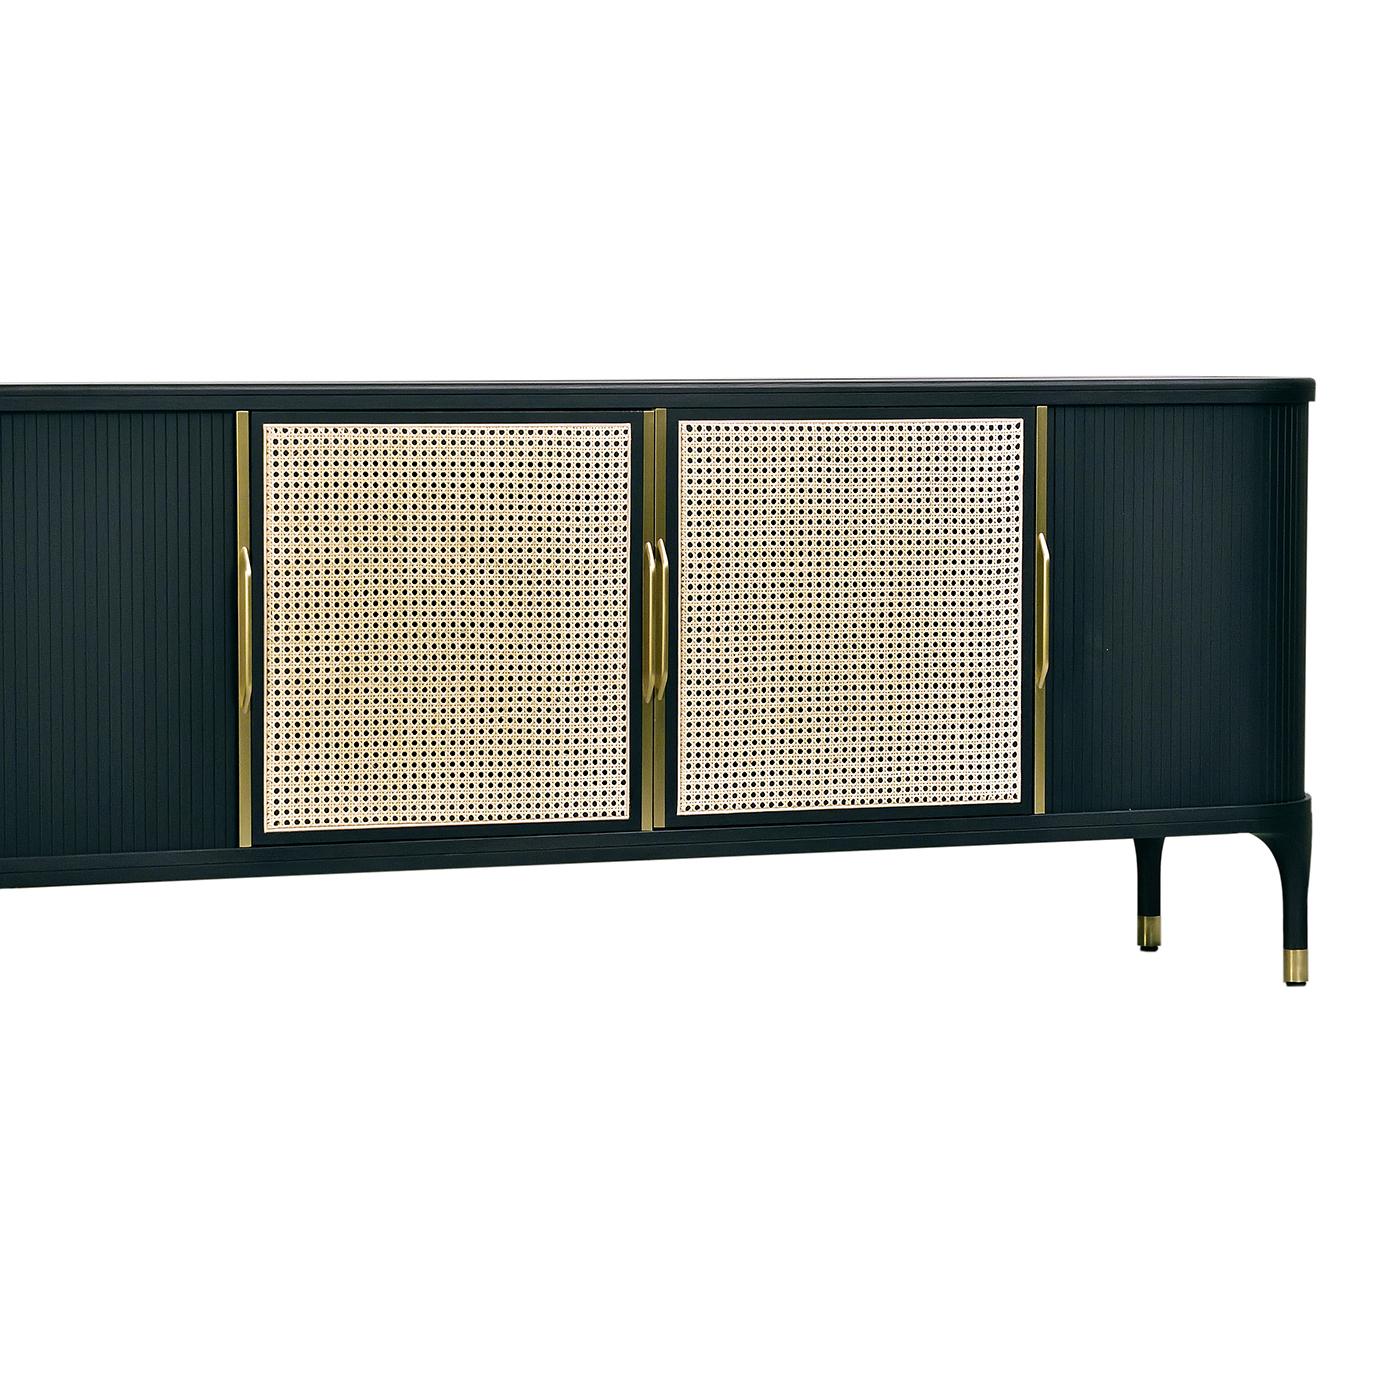 This glamorous sideboard showcases a Classic combination of materials in a captivating, modern reinterpretation. Its sophisticated ash frame is rounded at the edges and displays a timeless black finish, which suits the white Viennese cane of the